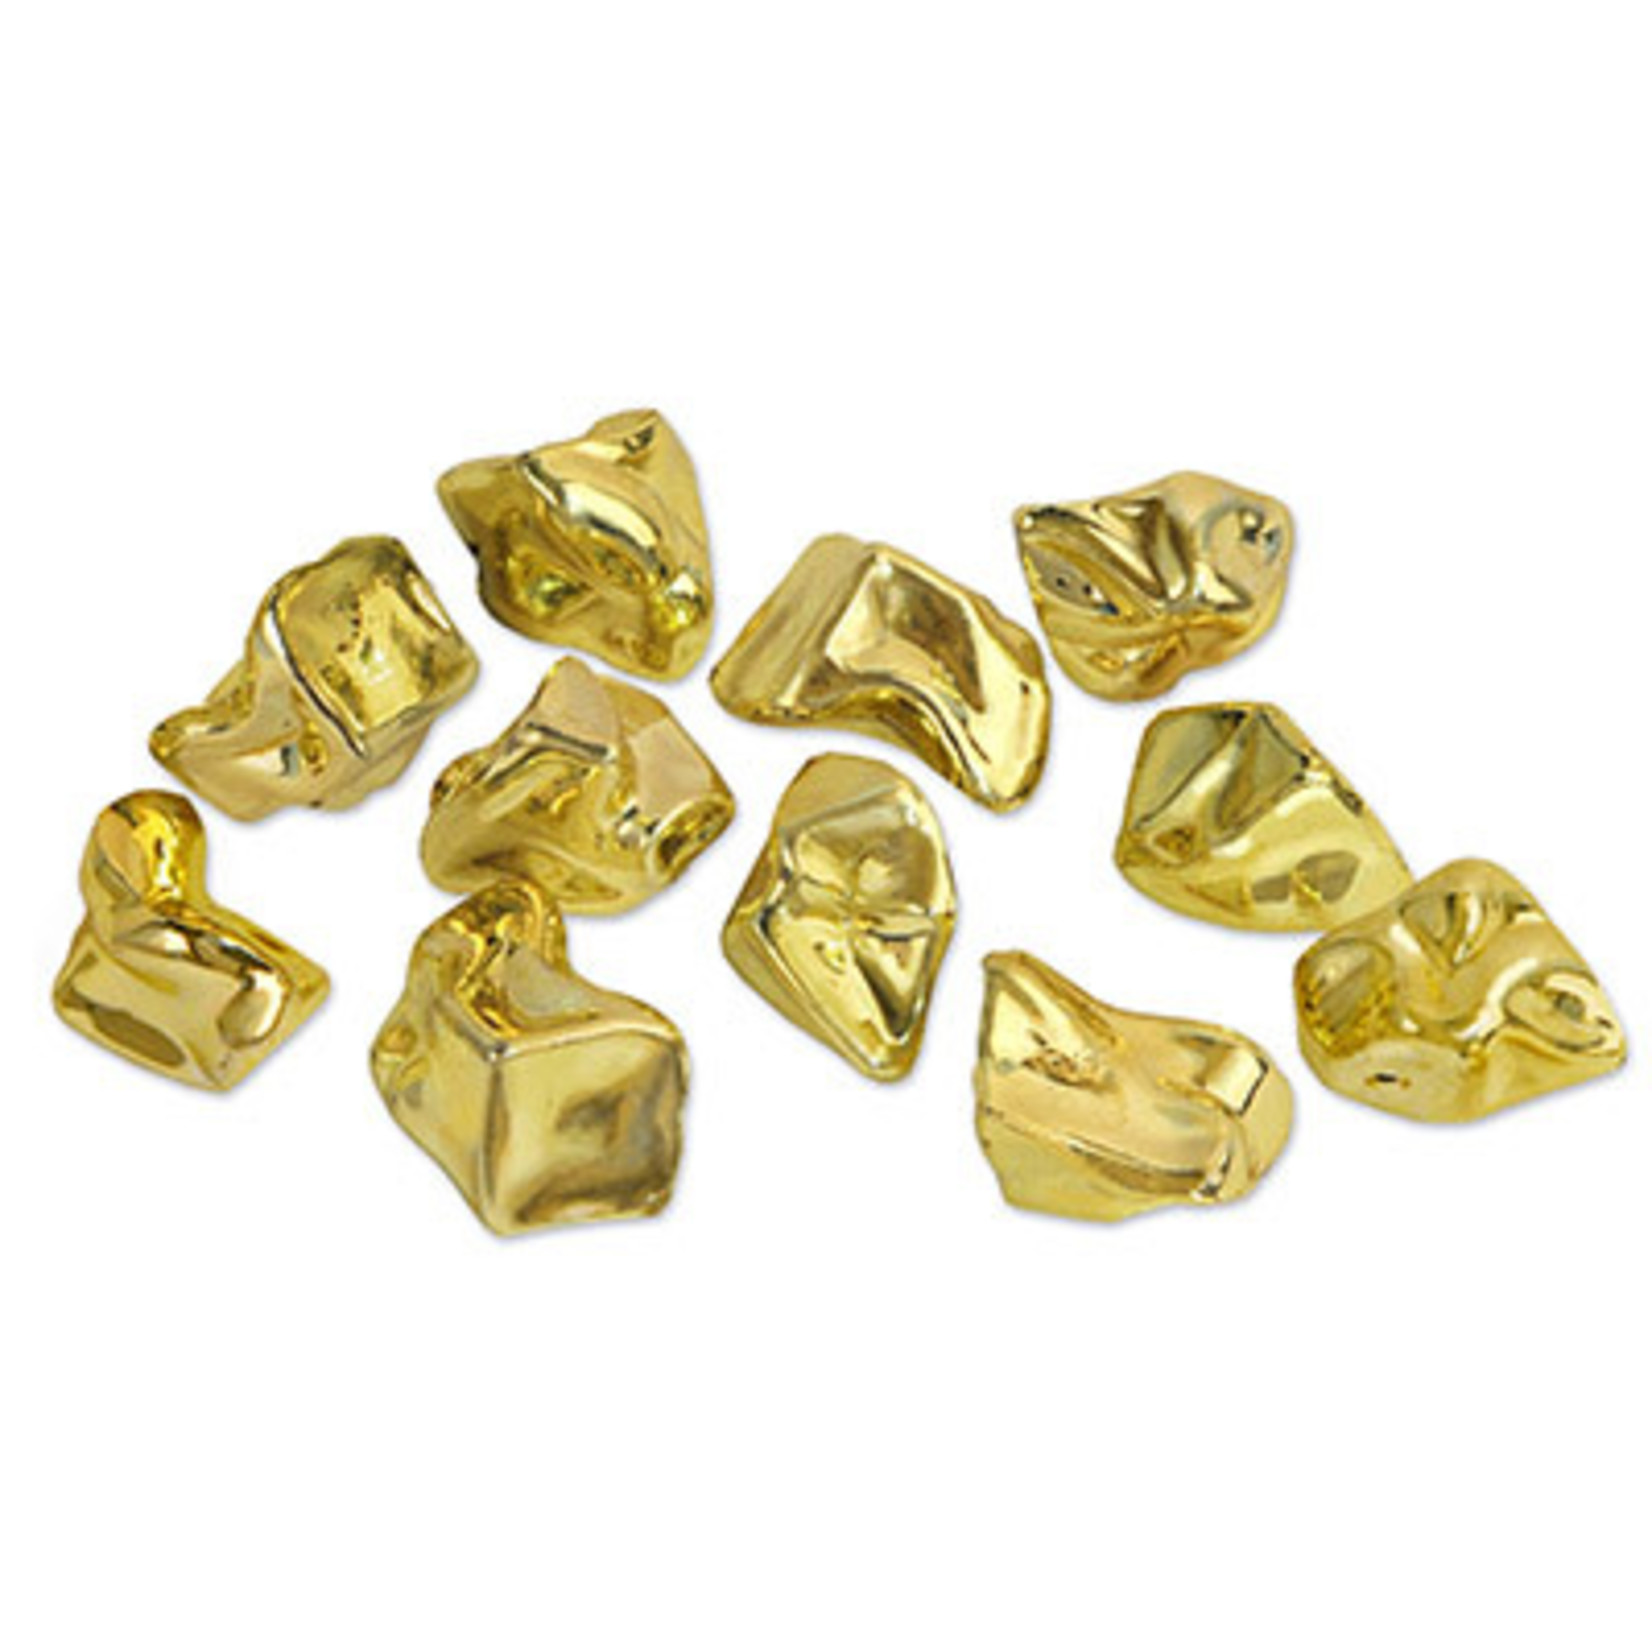 Beistle Plastic Gold Nuggets - 1oz.